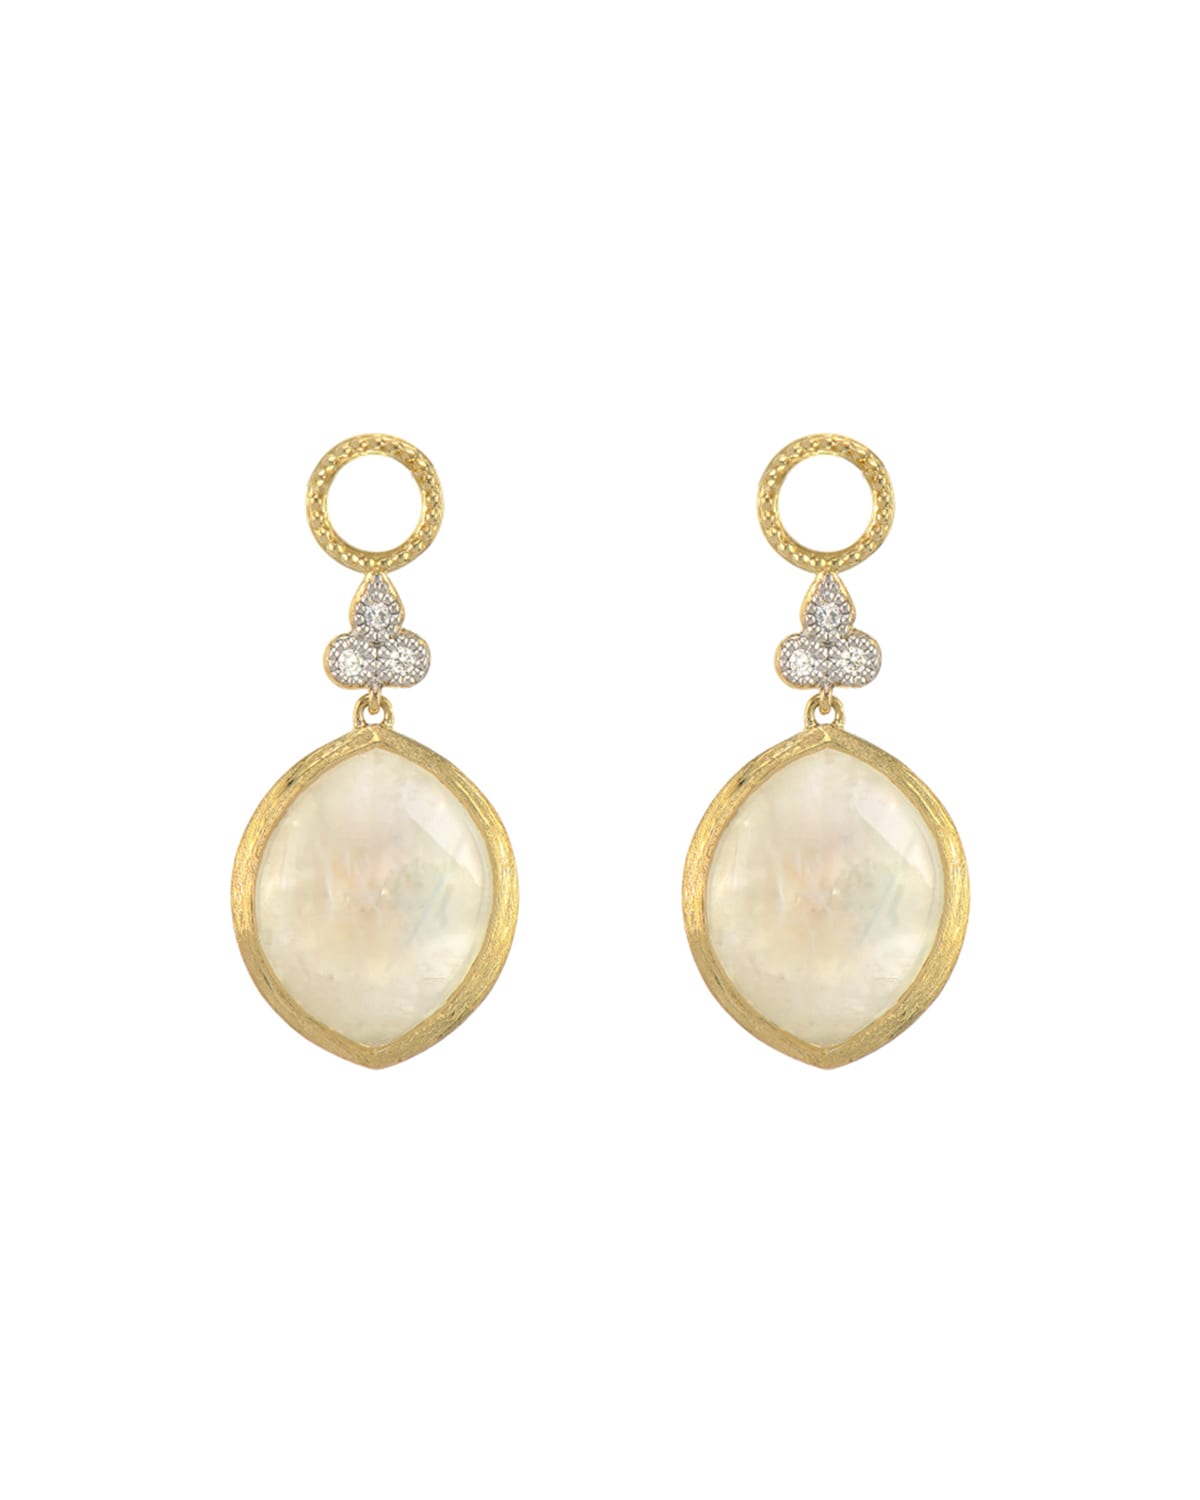 Jude Frances Provence 18k Moonstone Marquise Earring Charms